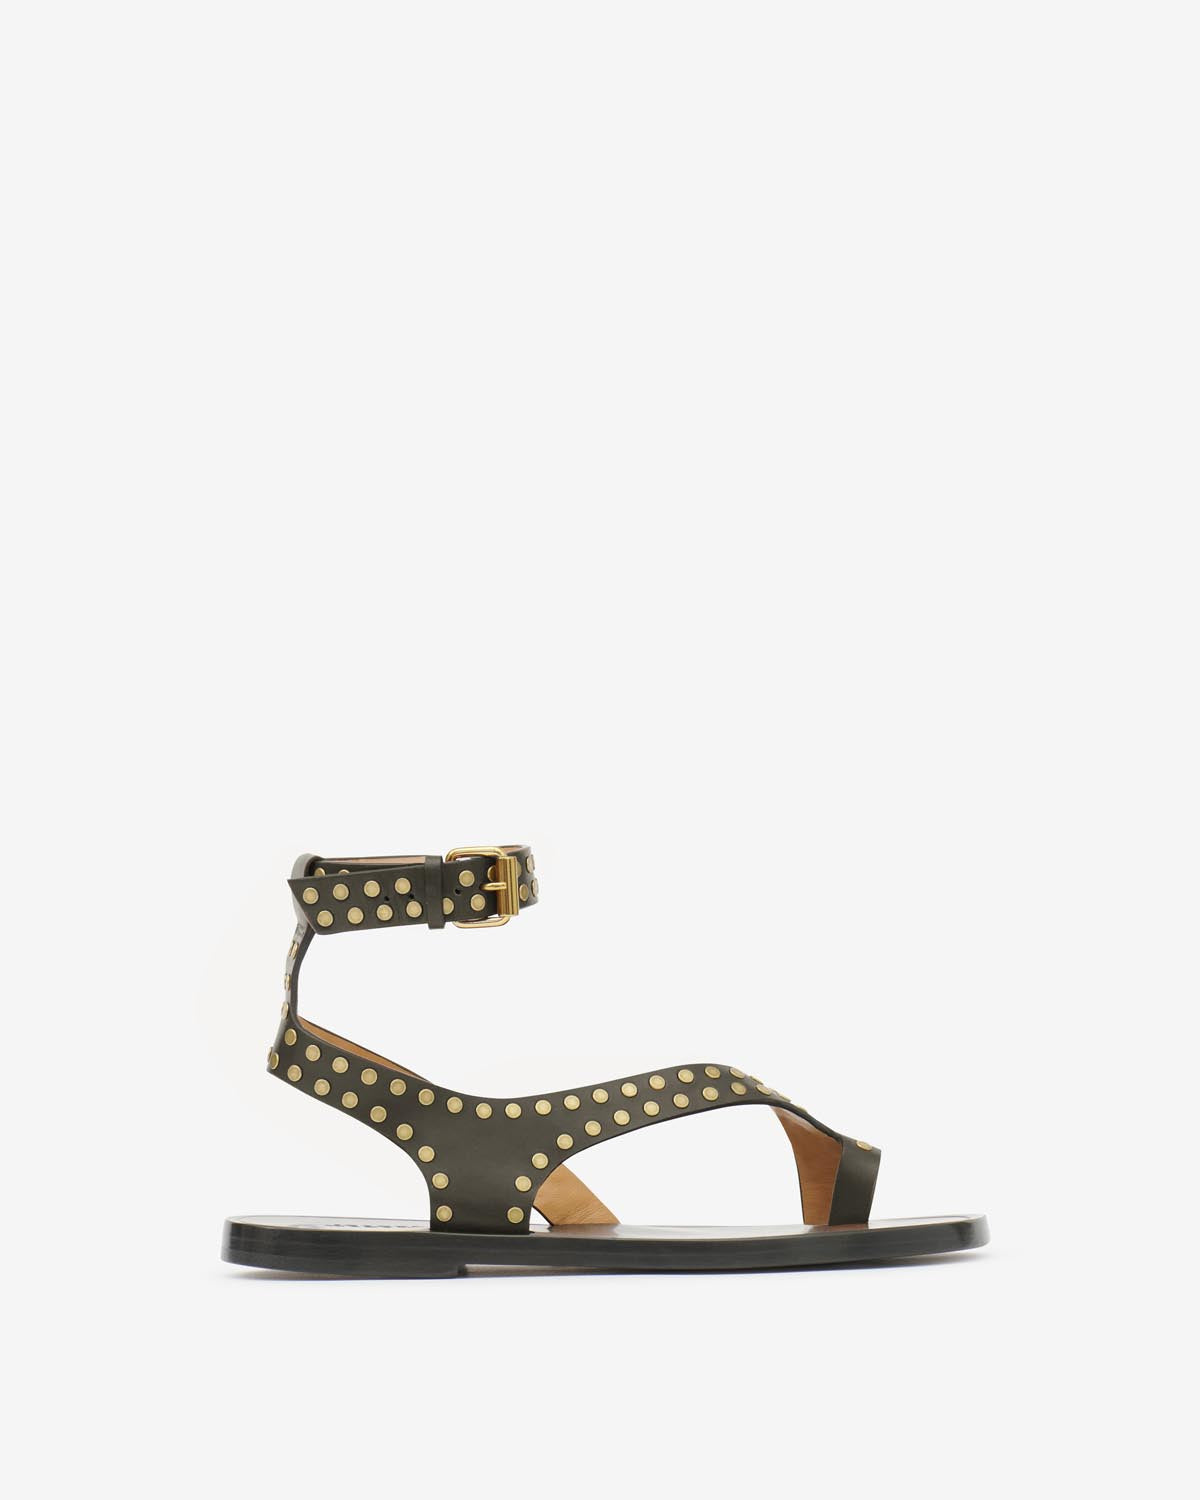 Jiona sandals Woman Black and gold 5